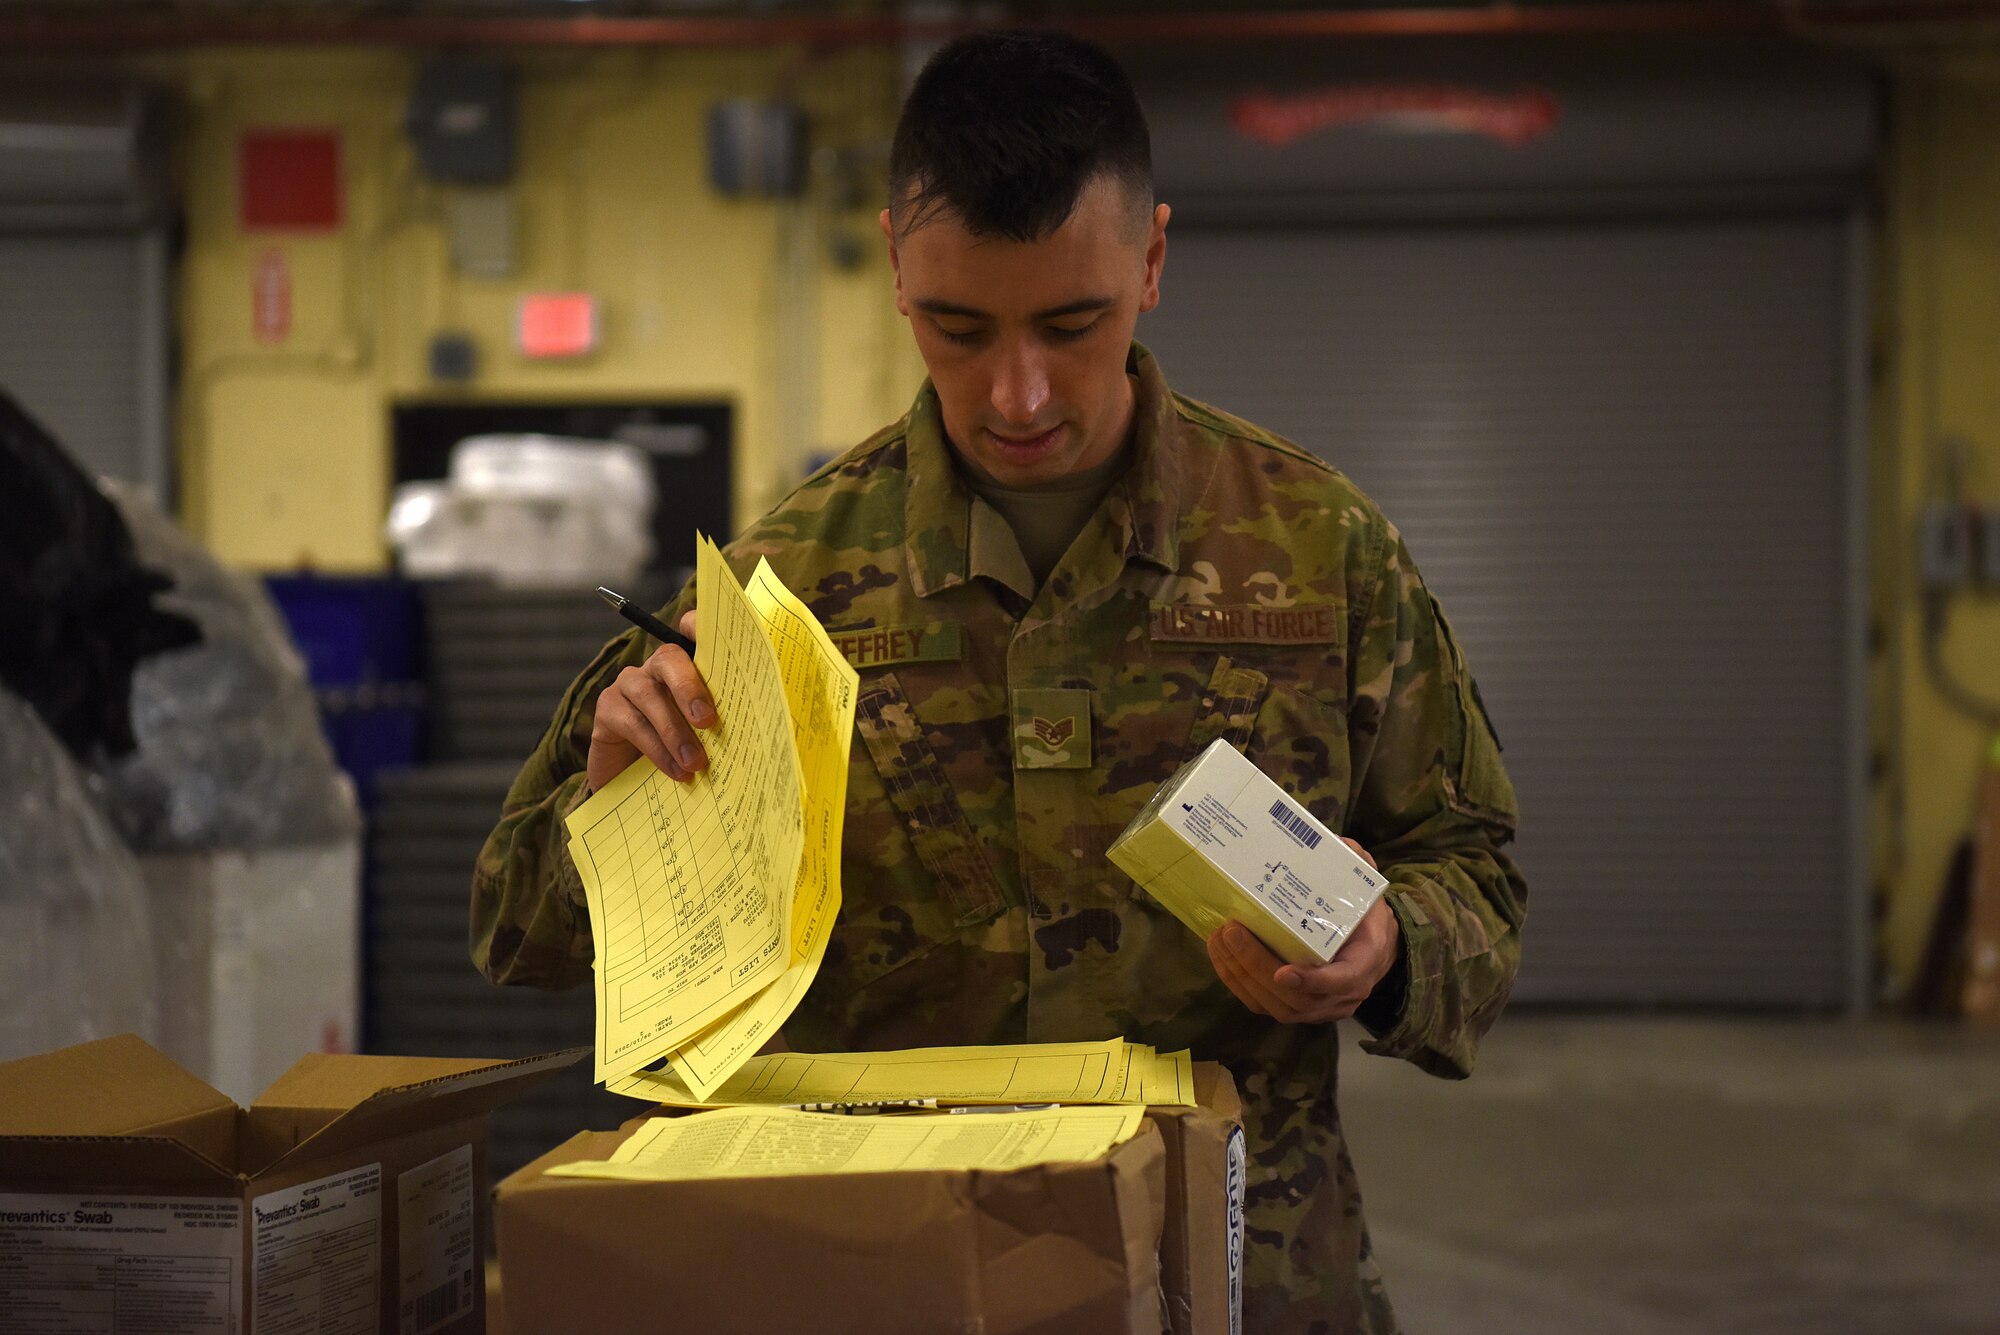 U.S. Air Force Staff Sgt. Gary Jeffrey, 81st Medical Support Squadron storage and distribution NCO in charge, inprocesses medical equipment inside Keesler Medical Center on Keesler Air Force Base, Mississippi, Sept. 11, 2019. Jeffrey was selected as one of the 12 Outstanding Airmen of the Year for 2018. (U.S. Air Force photo by Senior Airman Suzie Plotnikov)